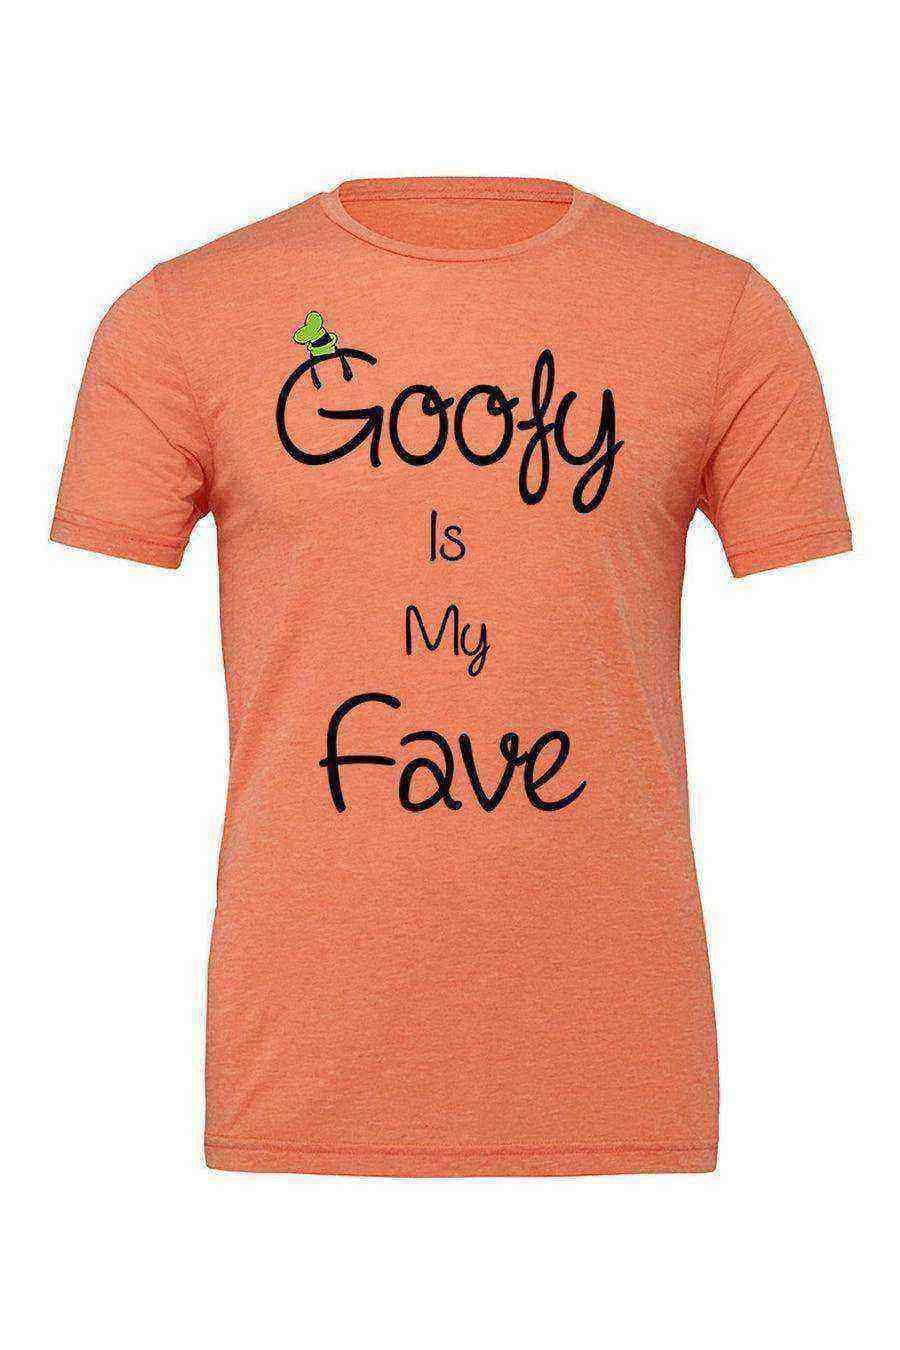 Toddler | Goofy is my Fave Shirt - Dylan's Tees